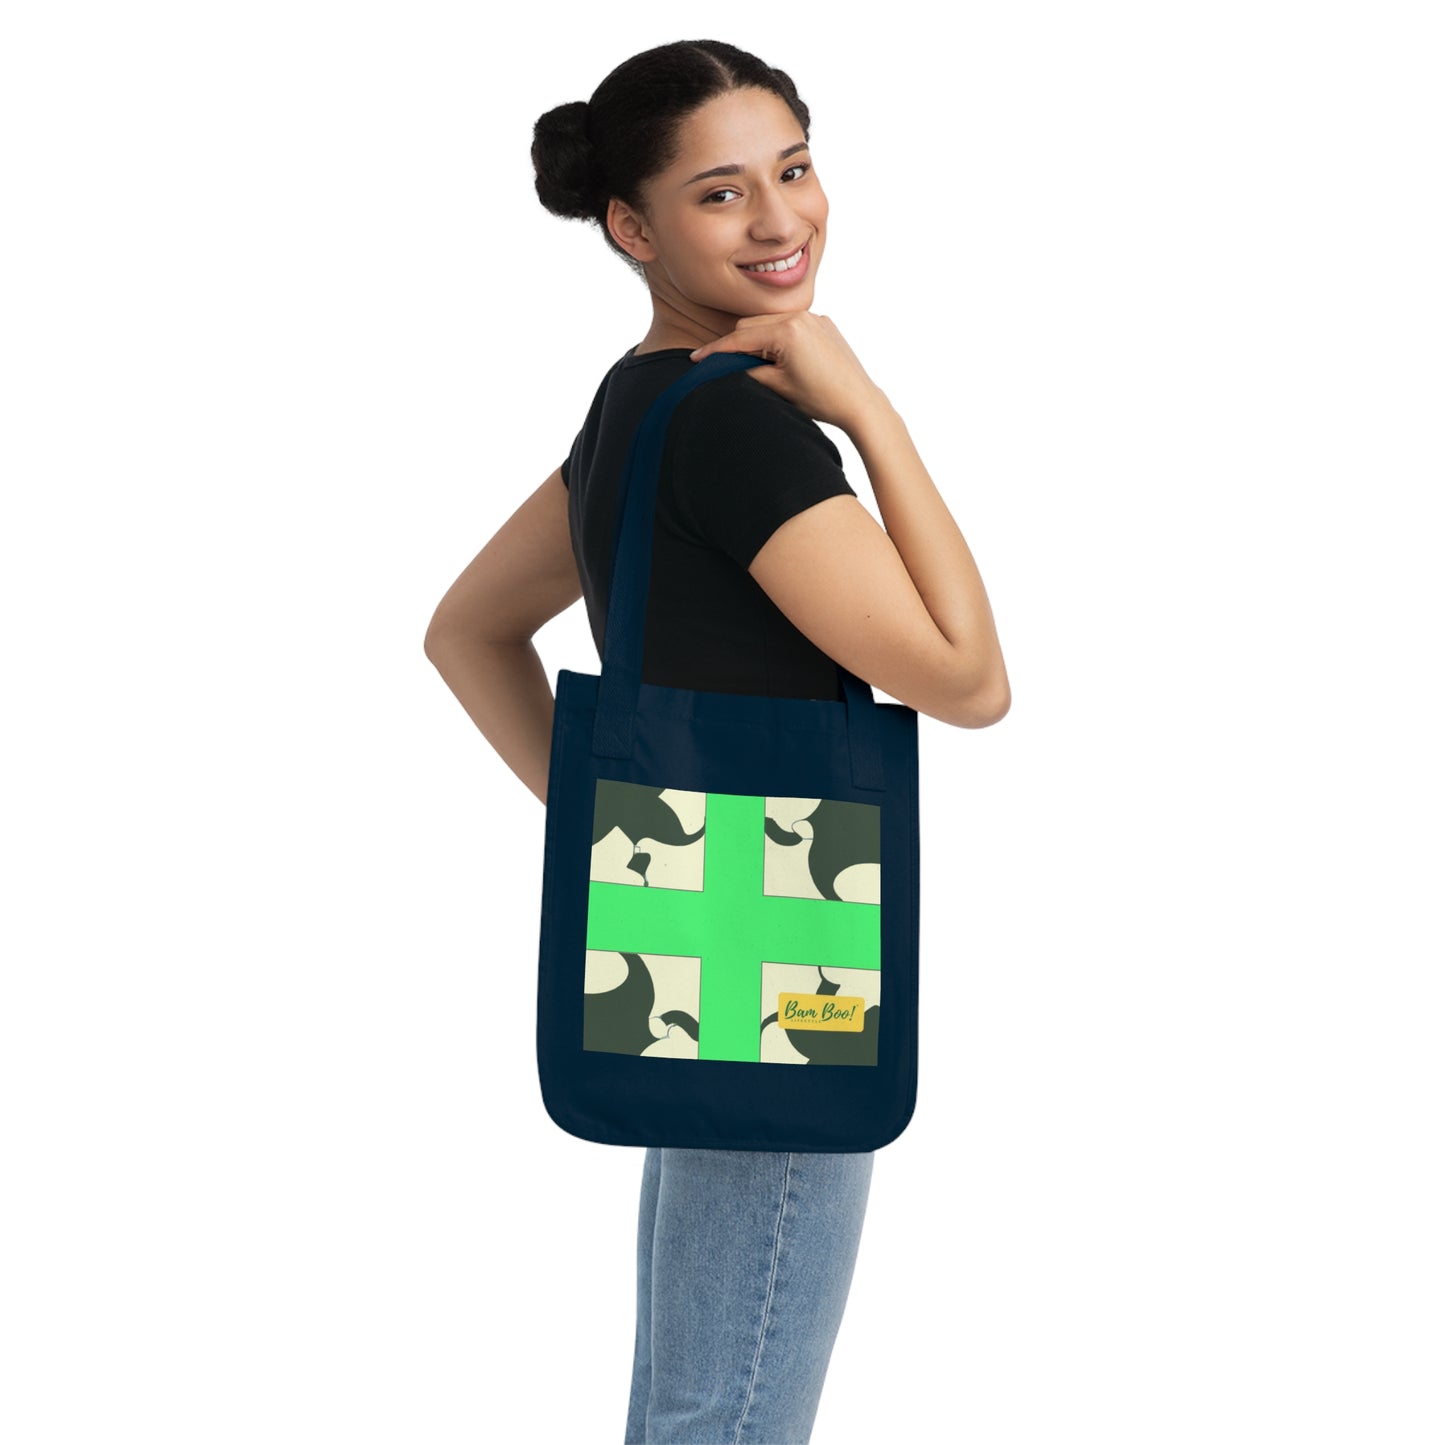 "Nature in Shapes: A Geometric Mosaic". - Bam Boo! Lifestyle Eco-friendly Tote Bag